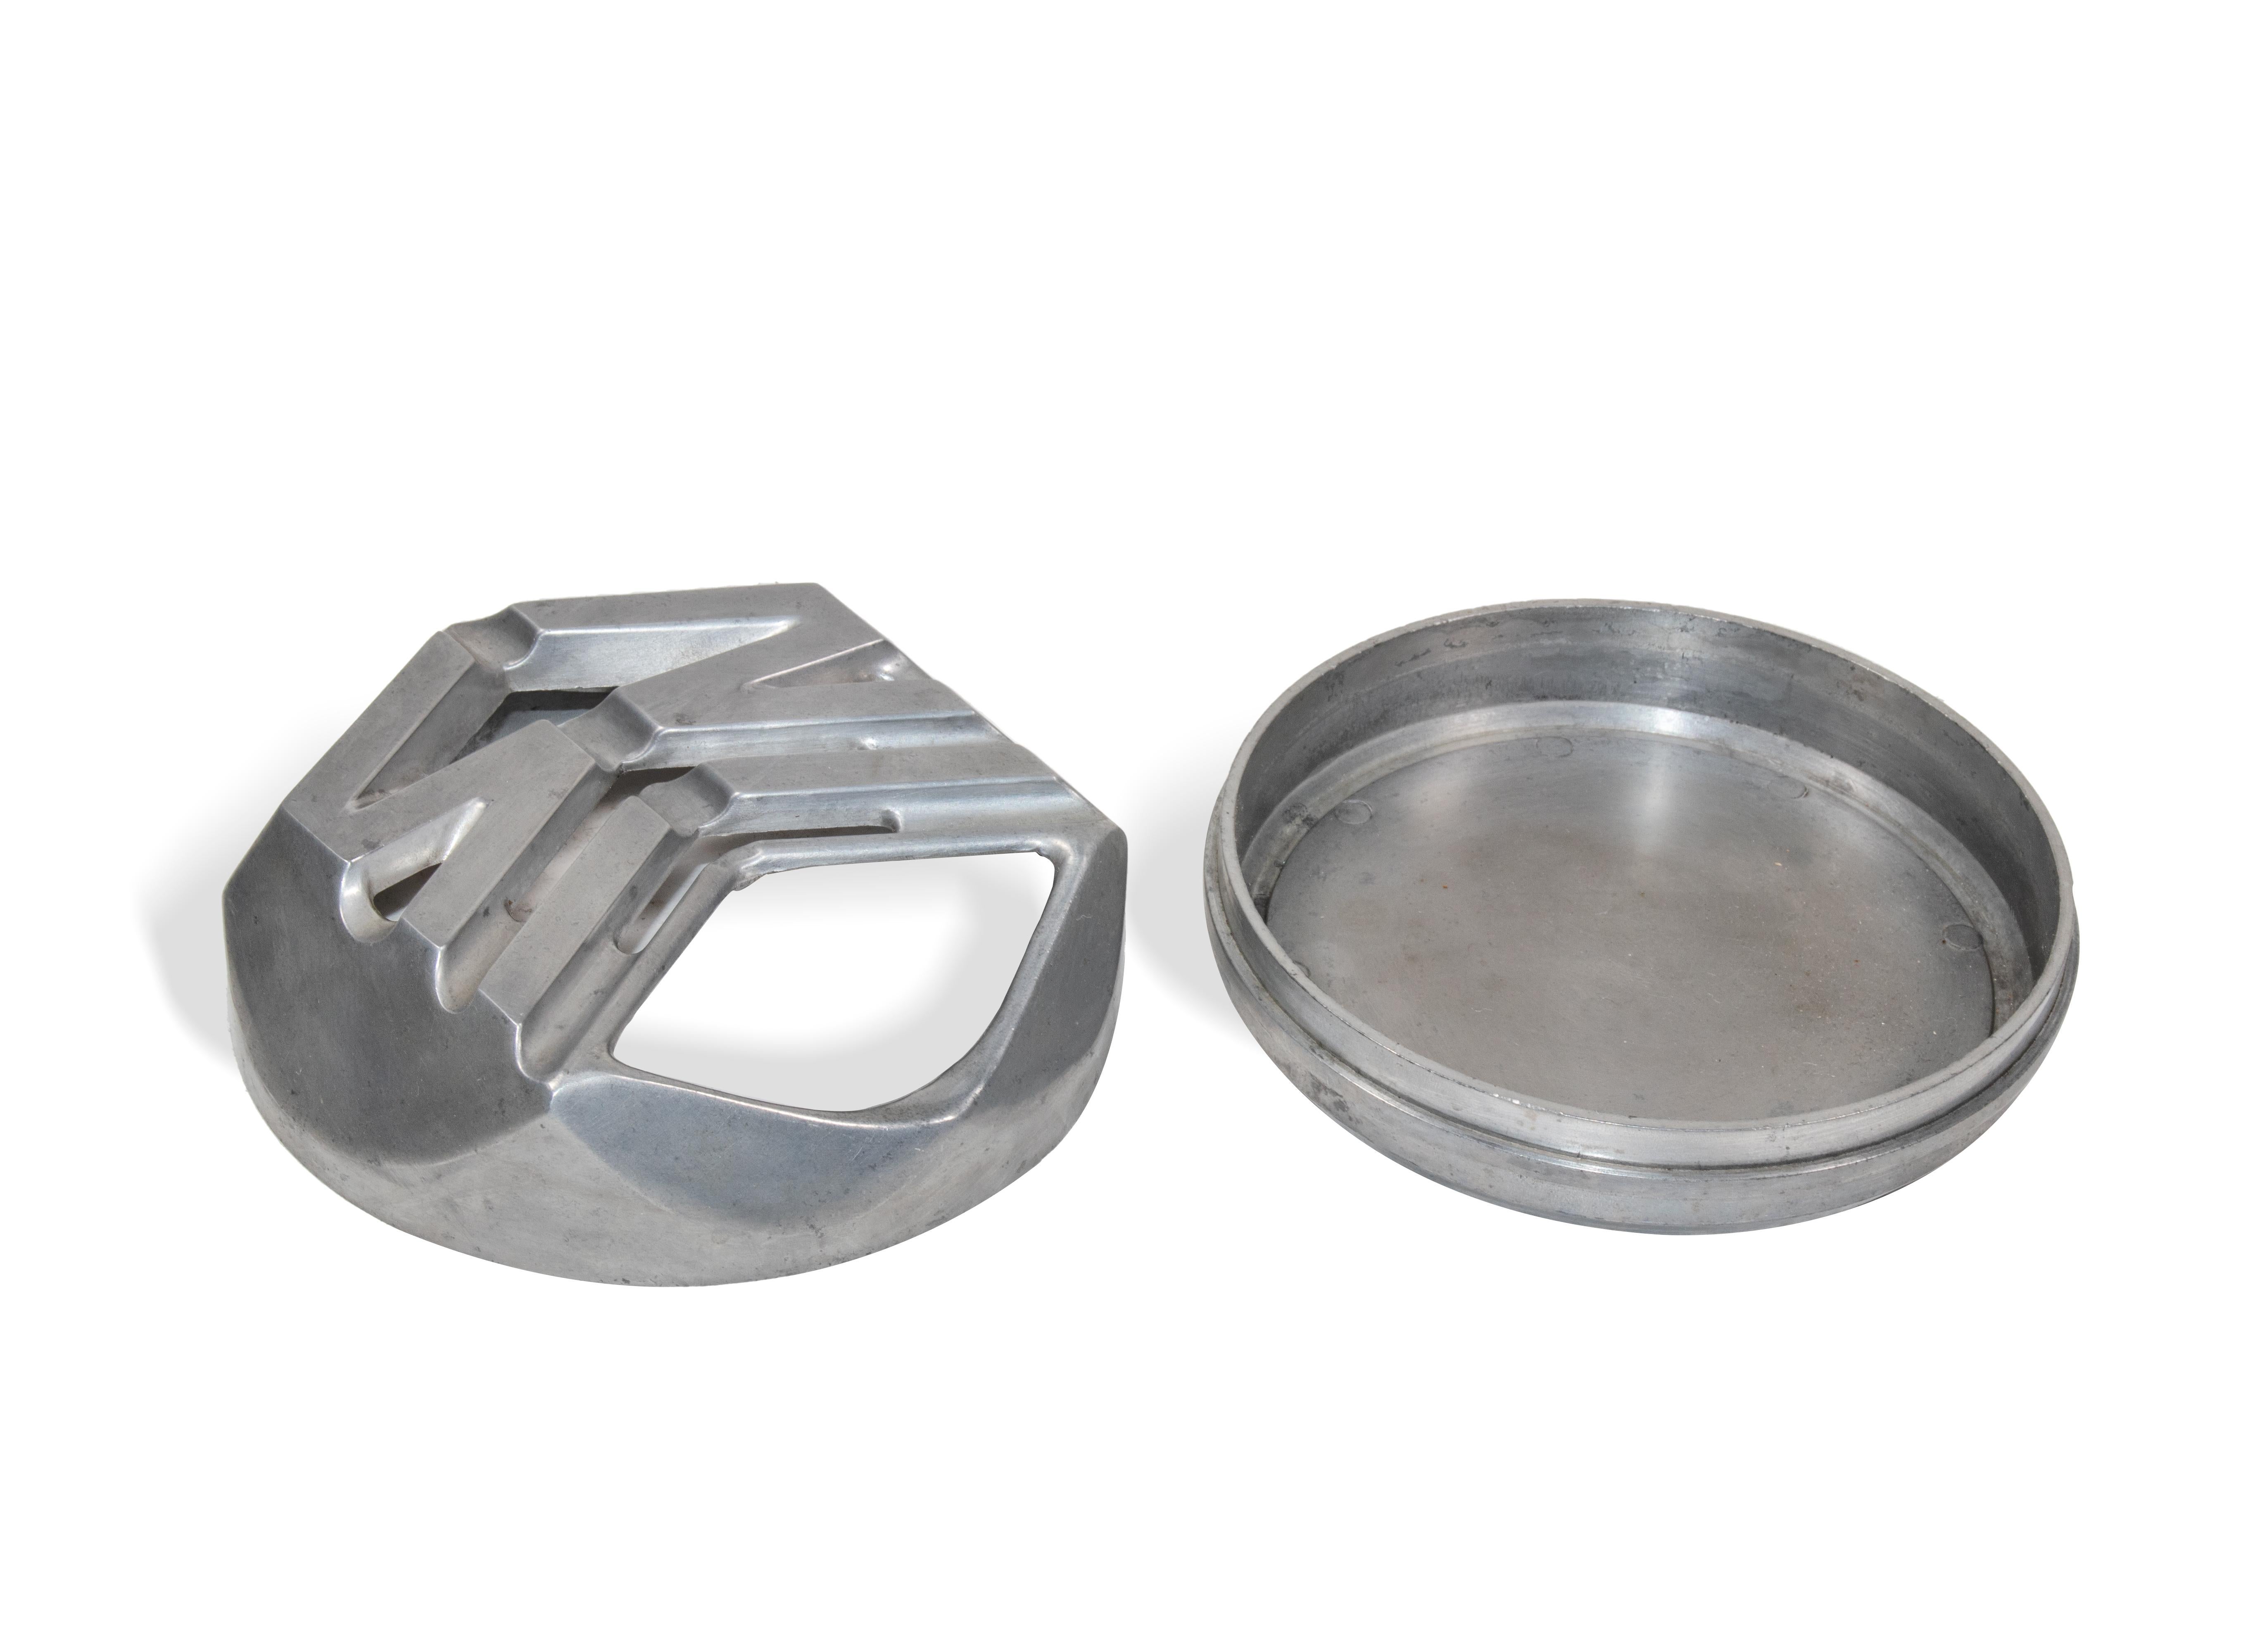 Solid and Machined Aluminum Apollo PN58 Ashtray by Sersterug Criant, 1960s In Good Condition For Sale In Roma, IT